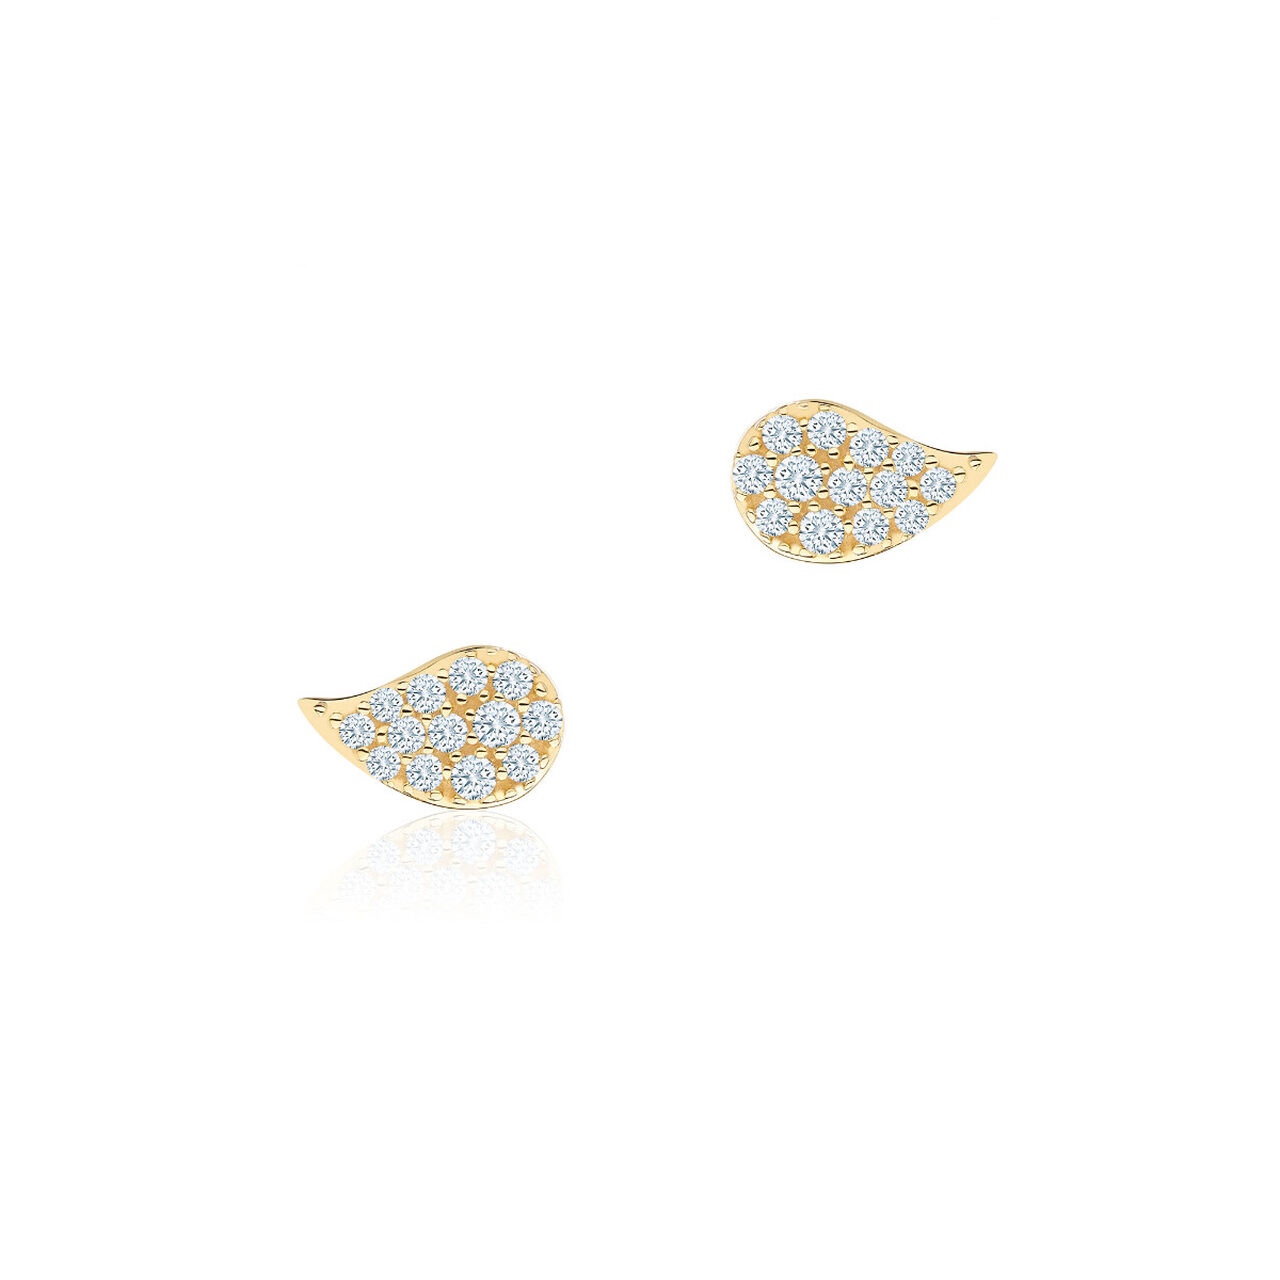 Birks Pétale  Yellow Gold and Diamond Stud Earrings, Small 450012335919